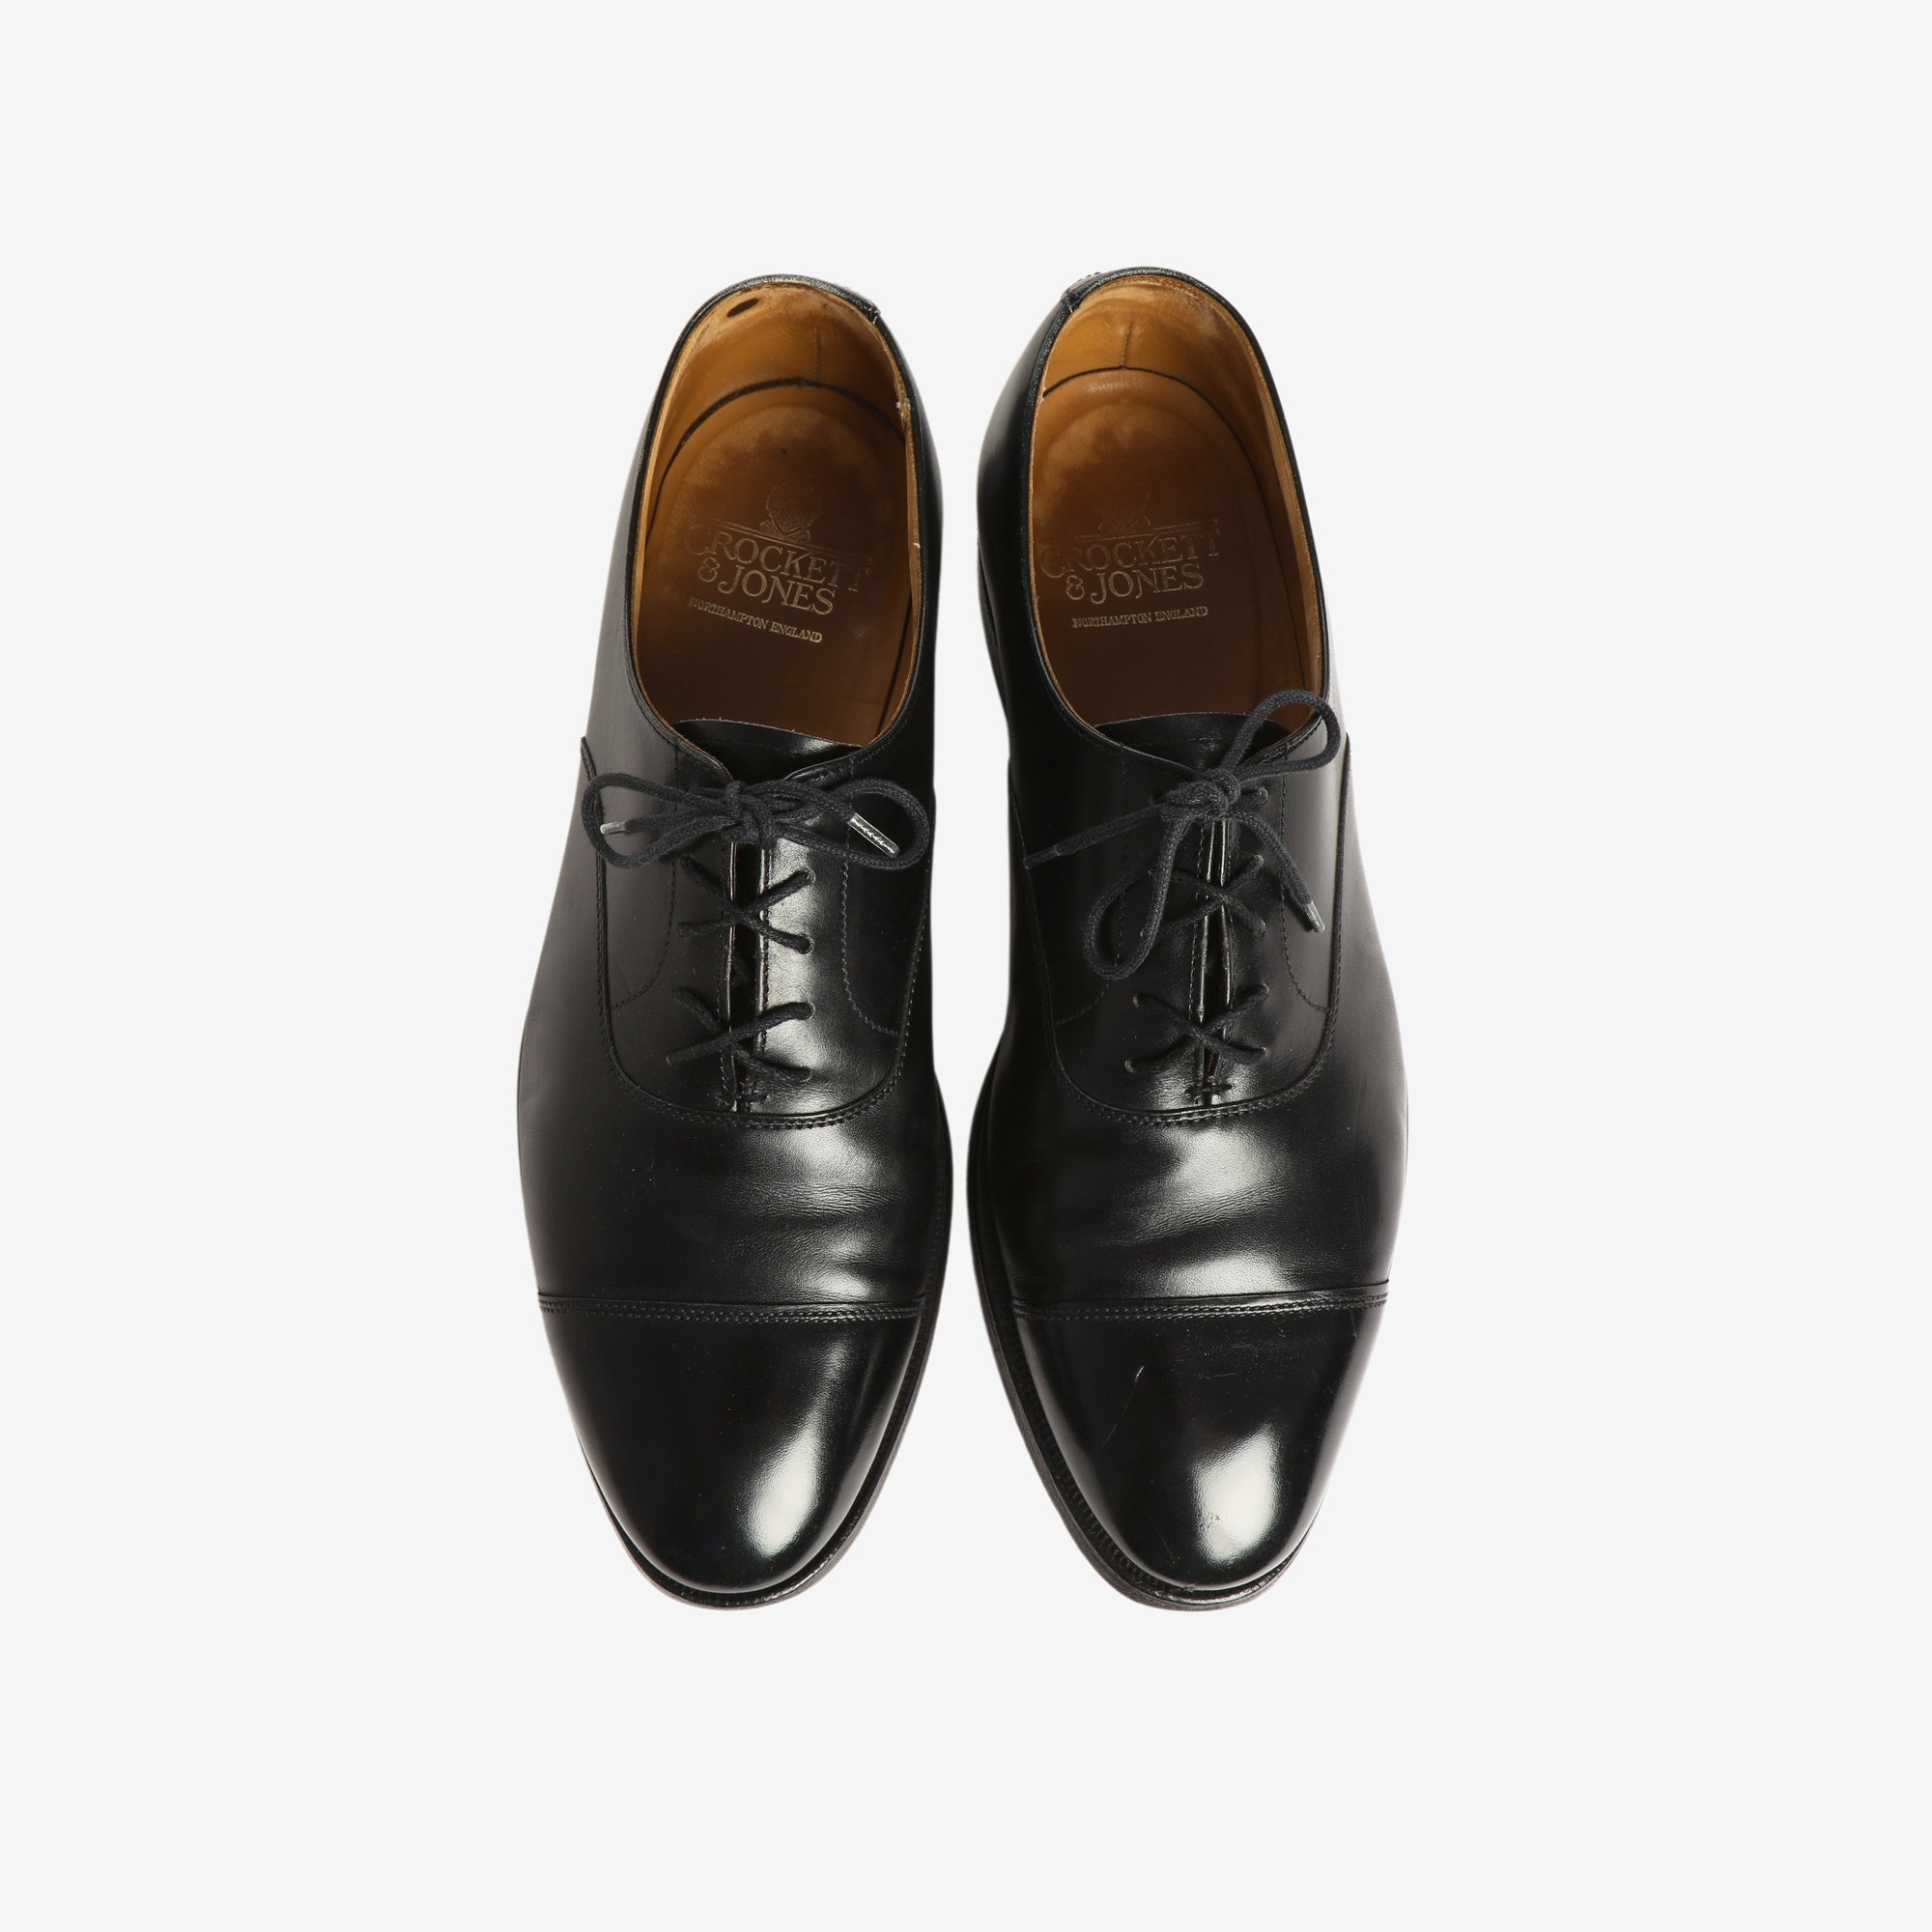 Connaught Oxford Shoe